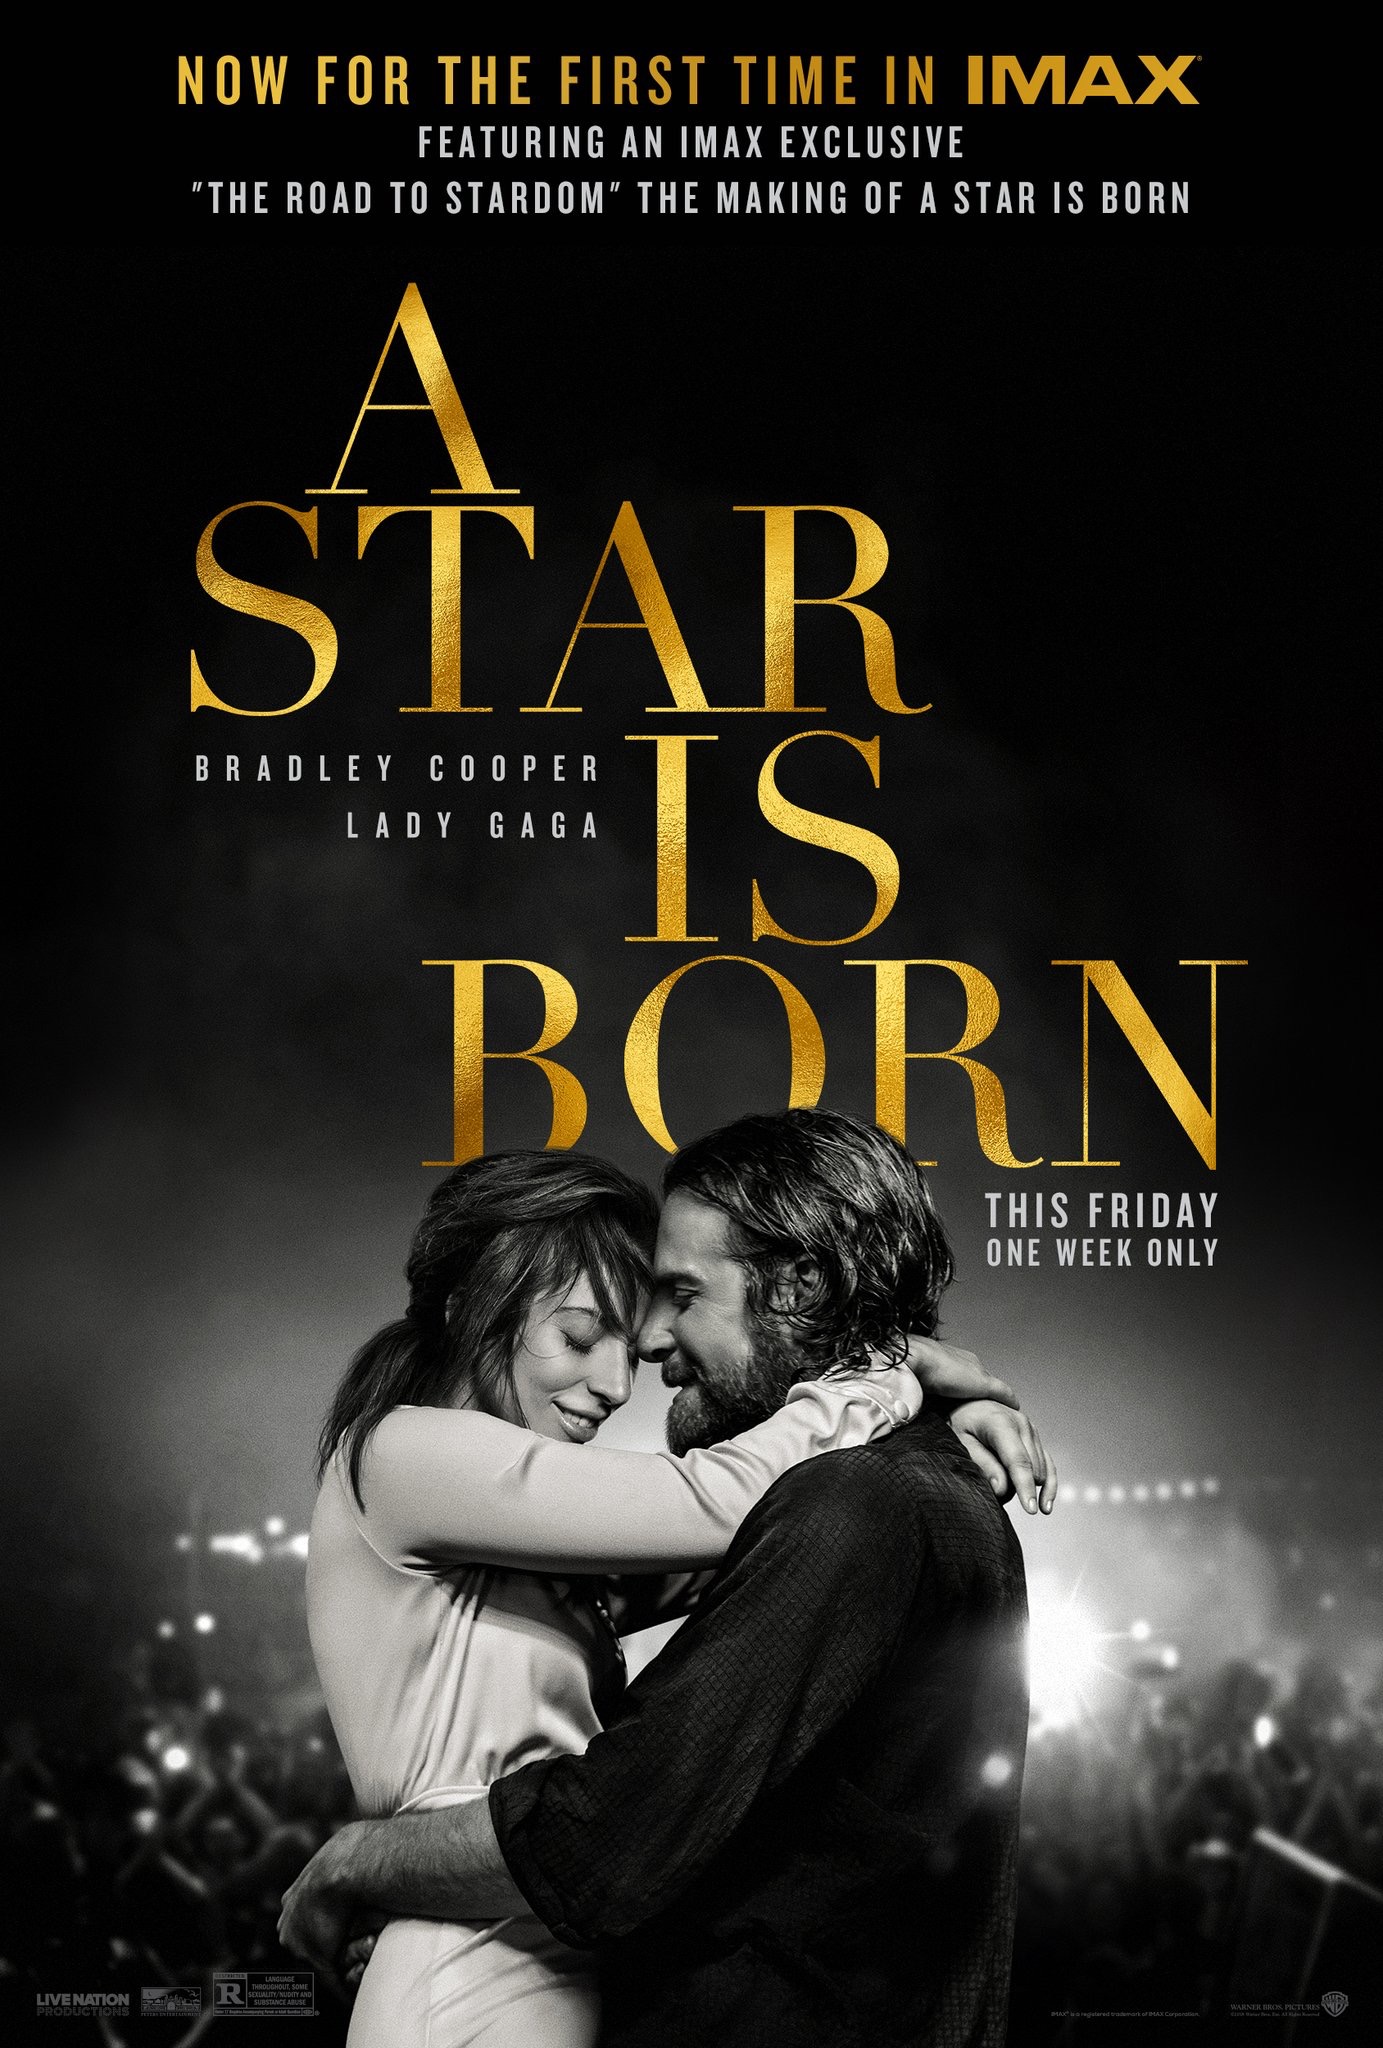 a star is born soundtrack download free